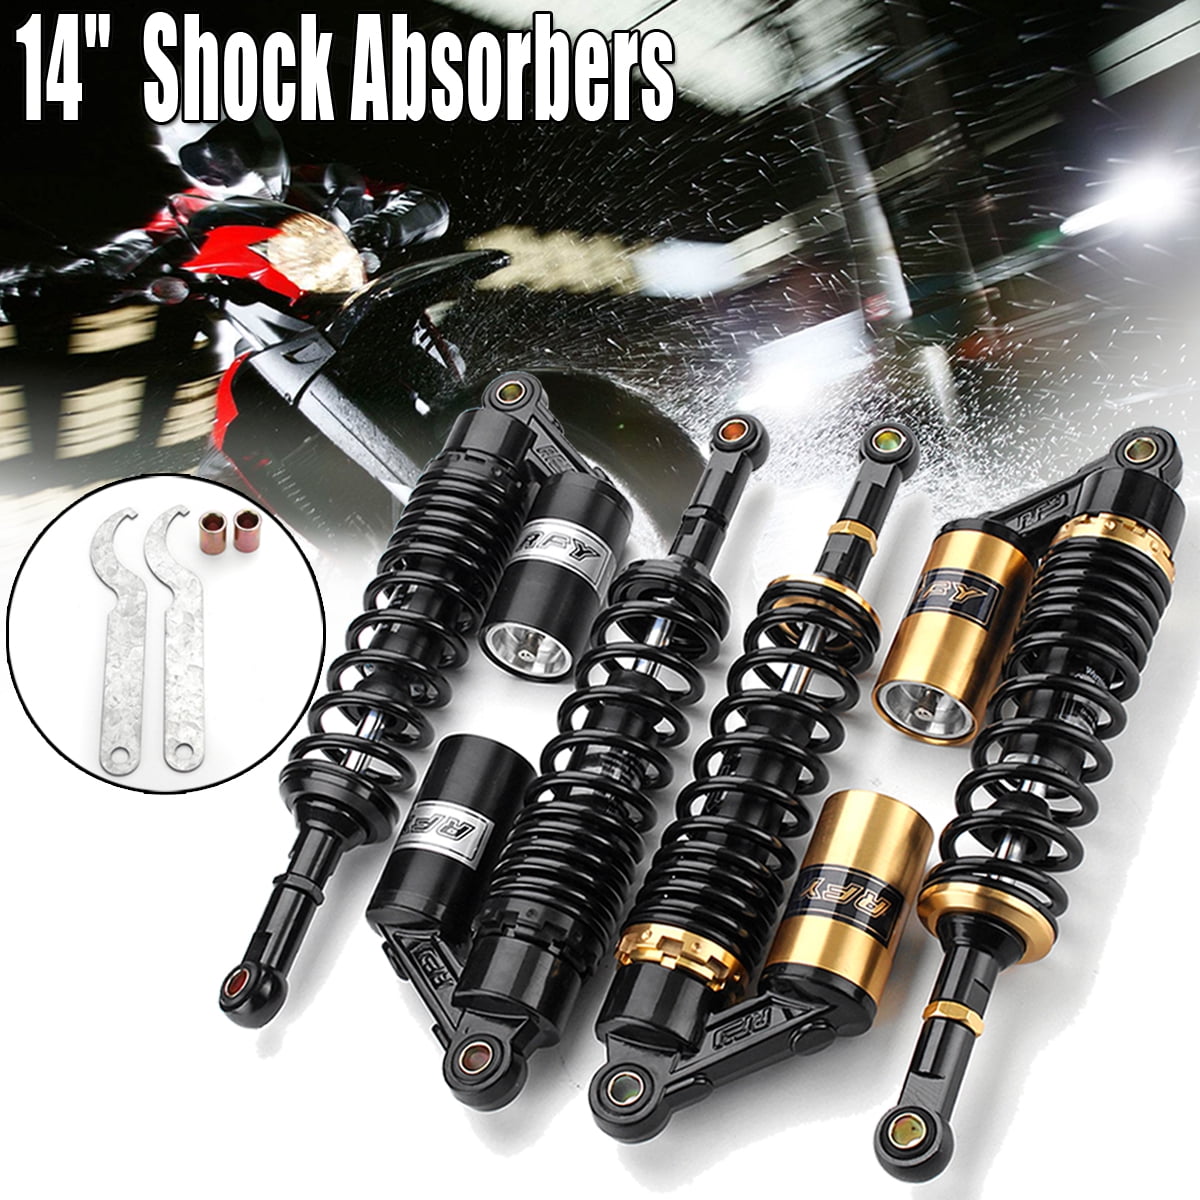 750cc Motorcycles waltyotur 340 mm 13.5 Inch Rear Air Shocks Absorber Suspension Damper Replacement for Honda Yamaha and Most 150cc 